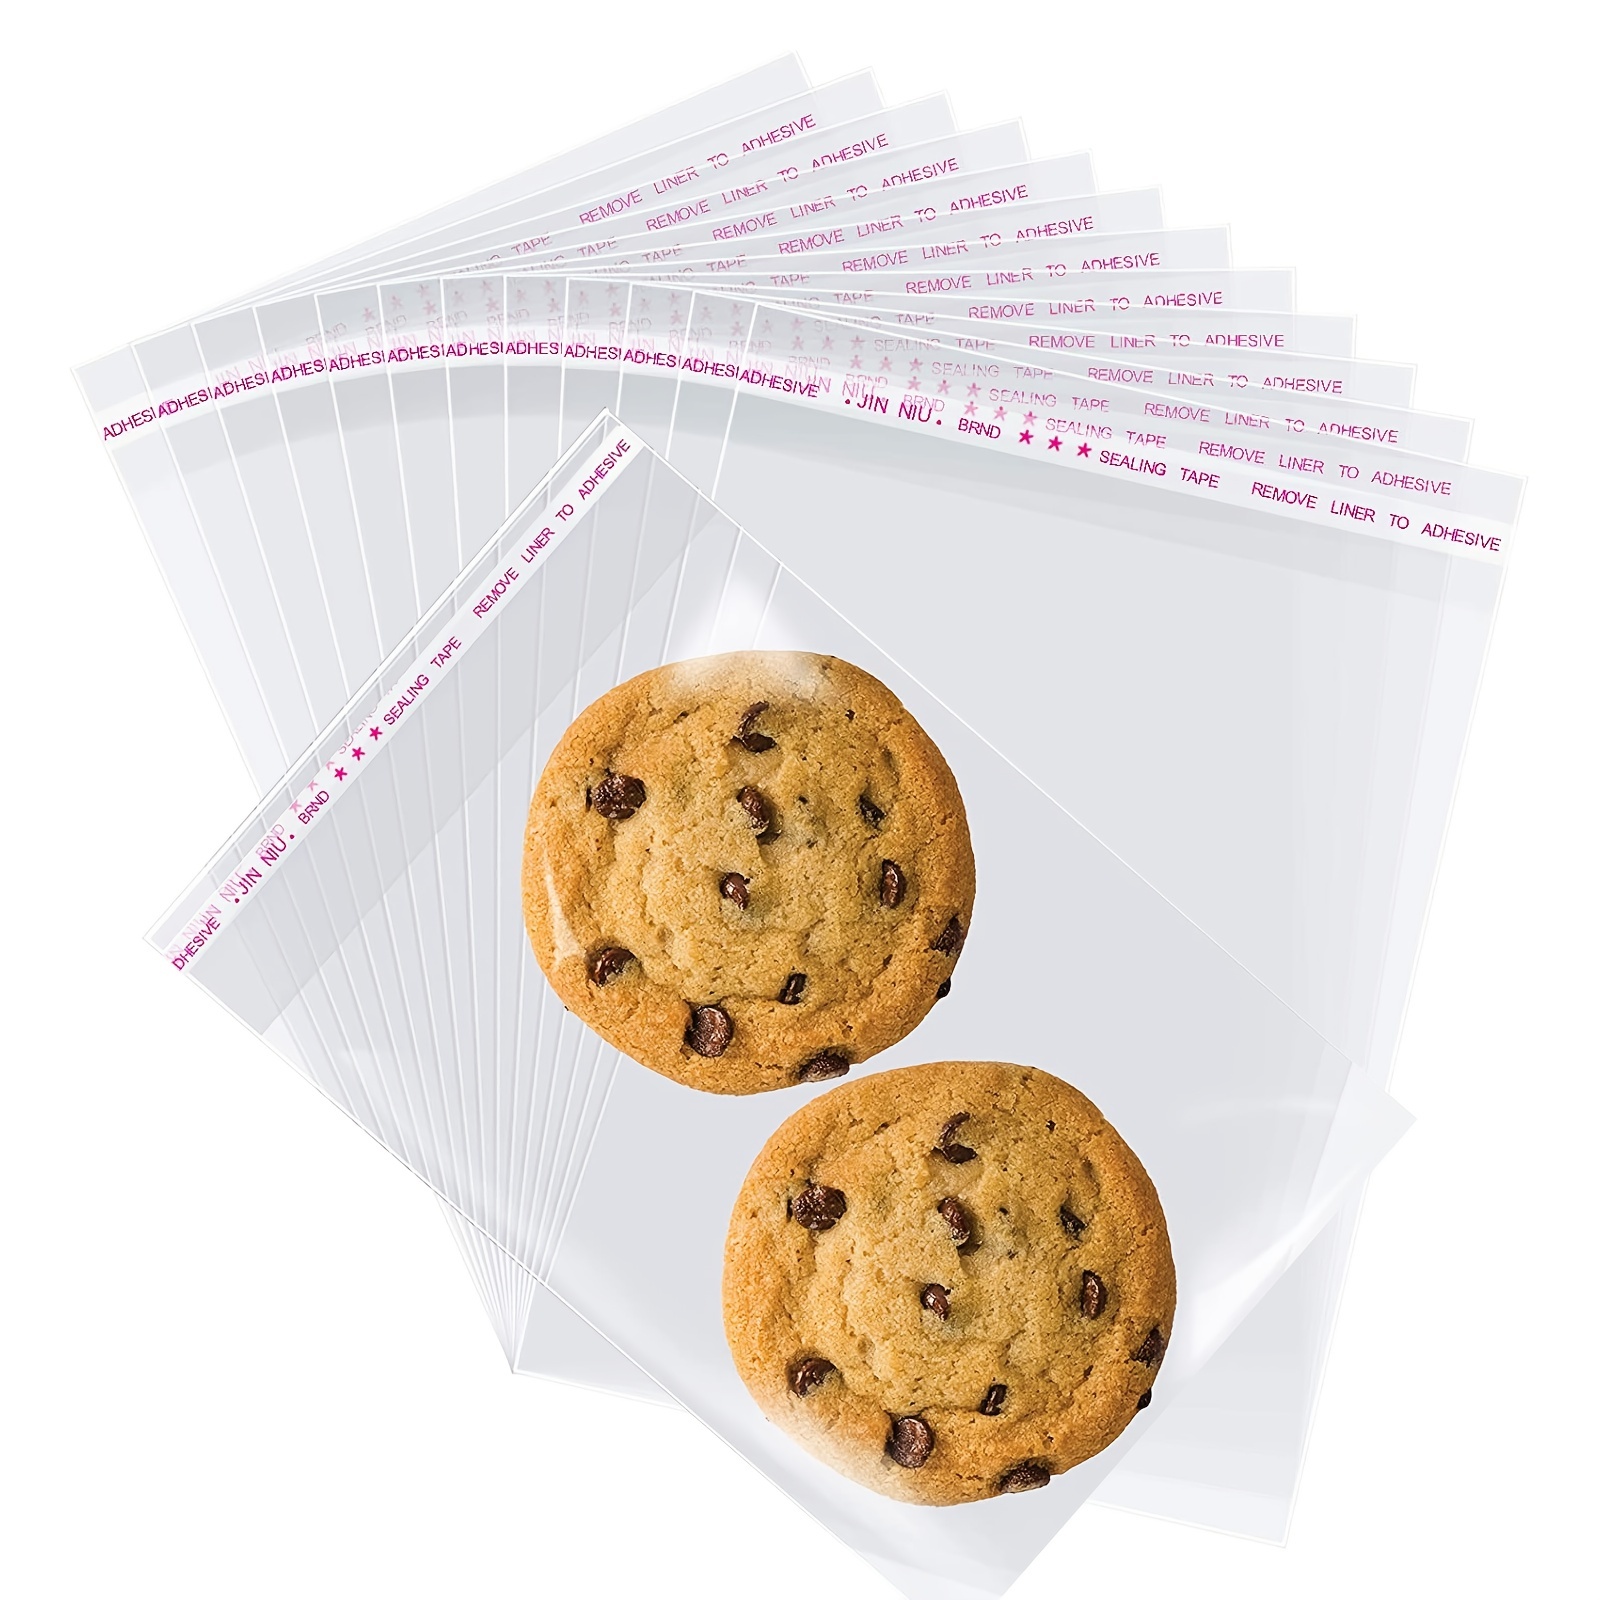 Snack Bags, Clear Cellophane Goodie Bags, Self-adhesive Treat Bags, Candy  Biscuit Cookie Bags, Holiday Gift Bags, Birthday Party Favors, Baking  Tools, Kitchen Gadgets, Kitchen Accessories, Home Kitchen Items, Multiple  Sizes Optional -